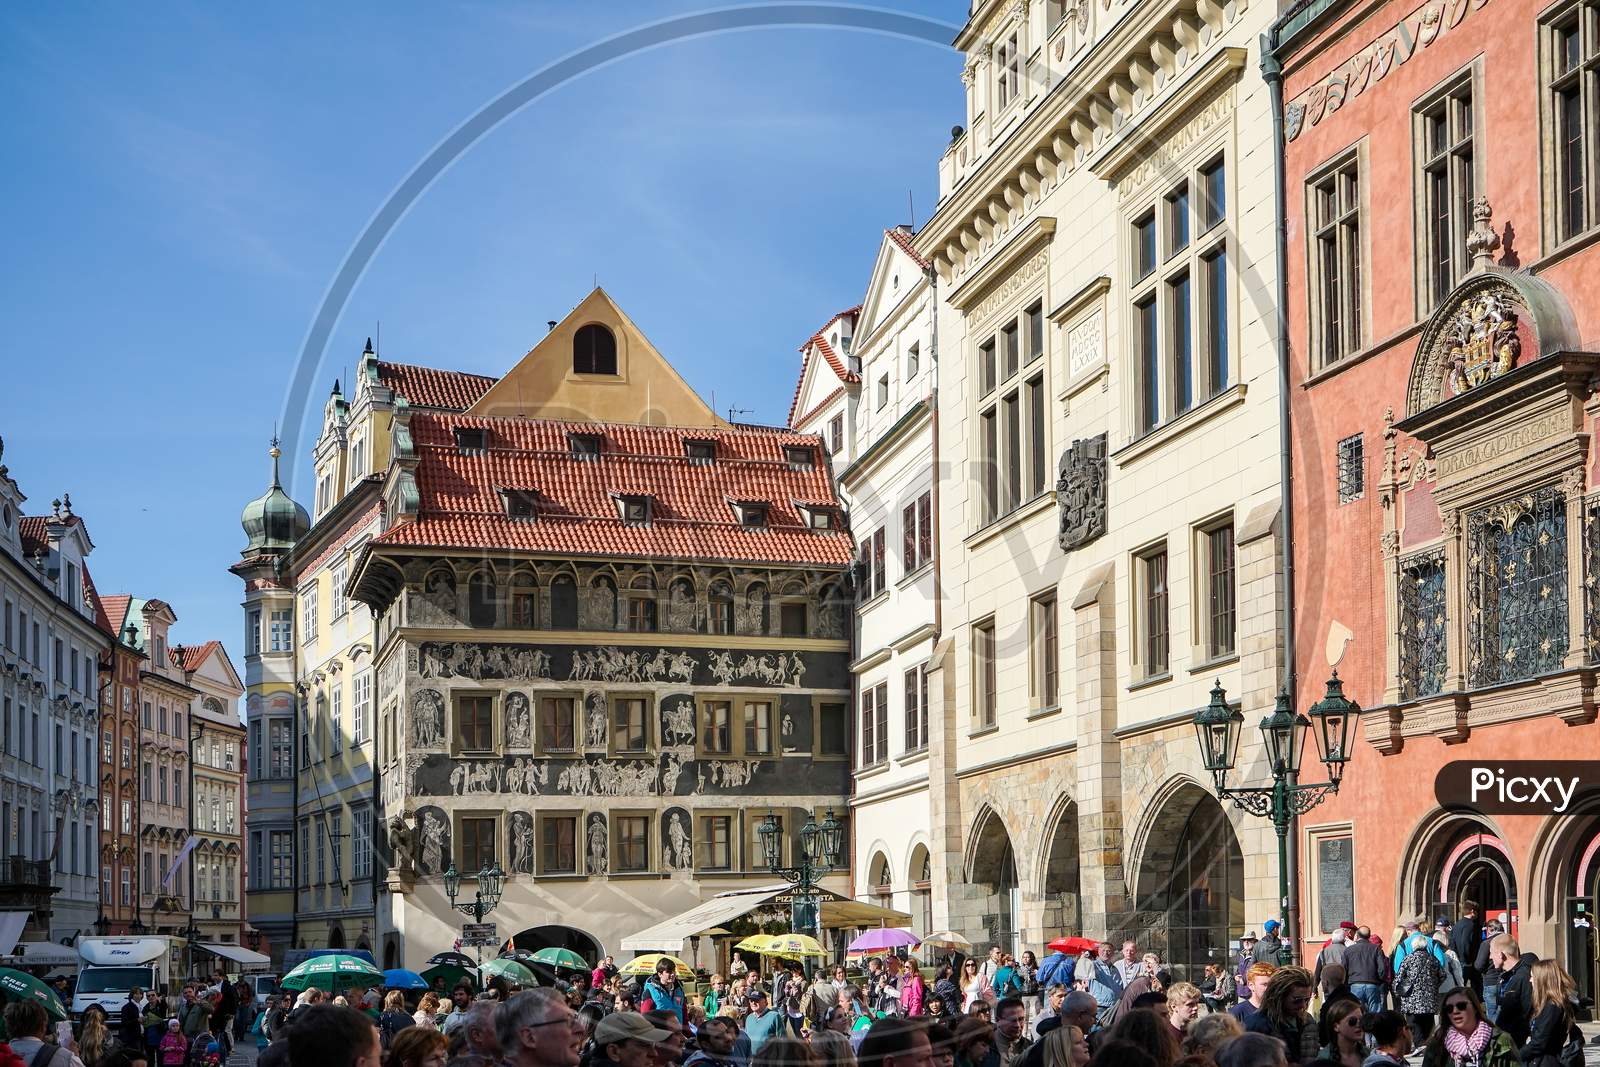 People Waiting For The Astronomical Clock In Prague